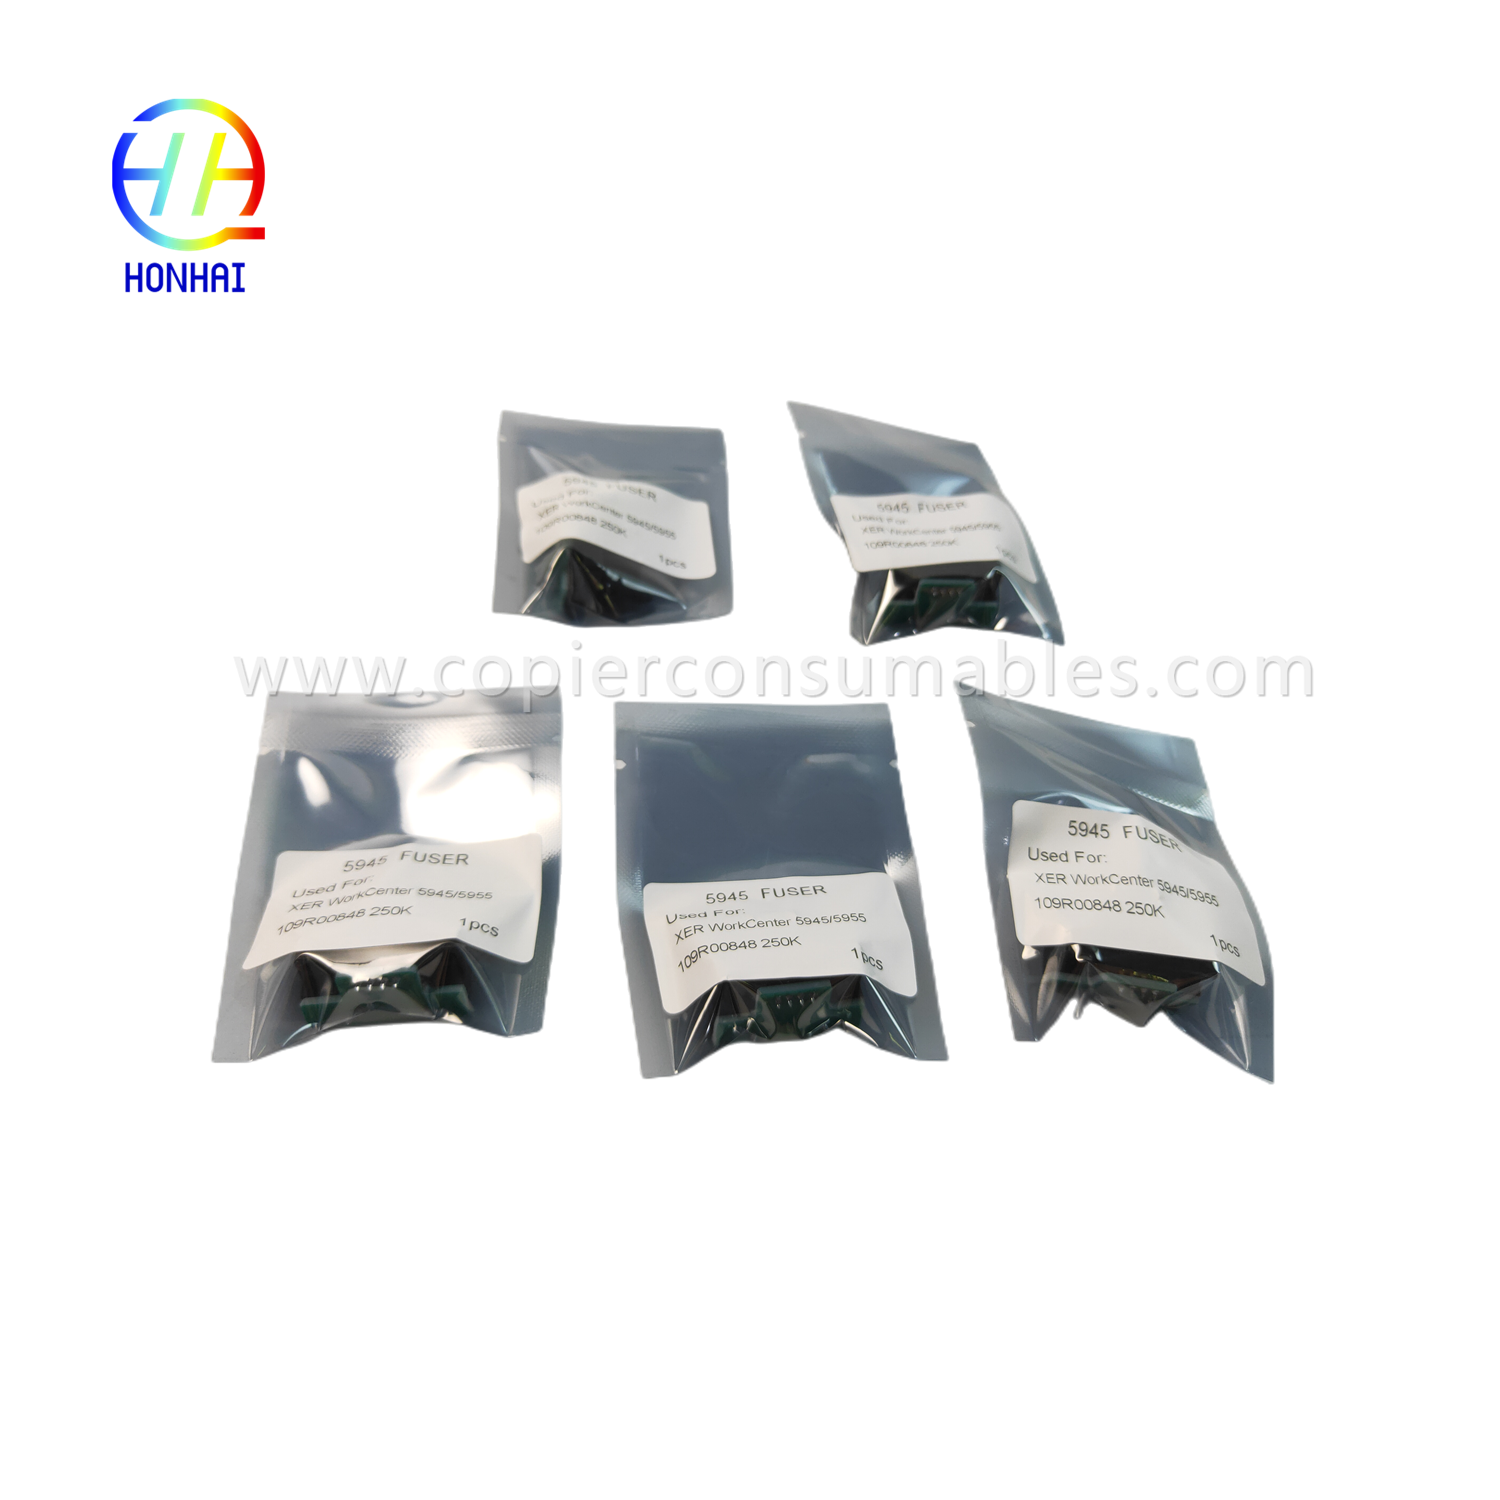 https://c585.goodao.net/fuser-chip-for-xerox-workcentre-5945-5955-109r00848-chip-2-product/